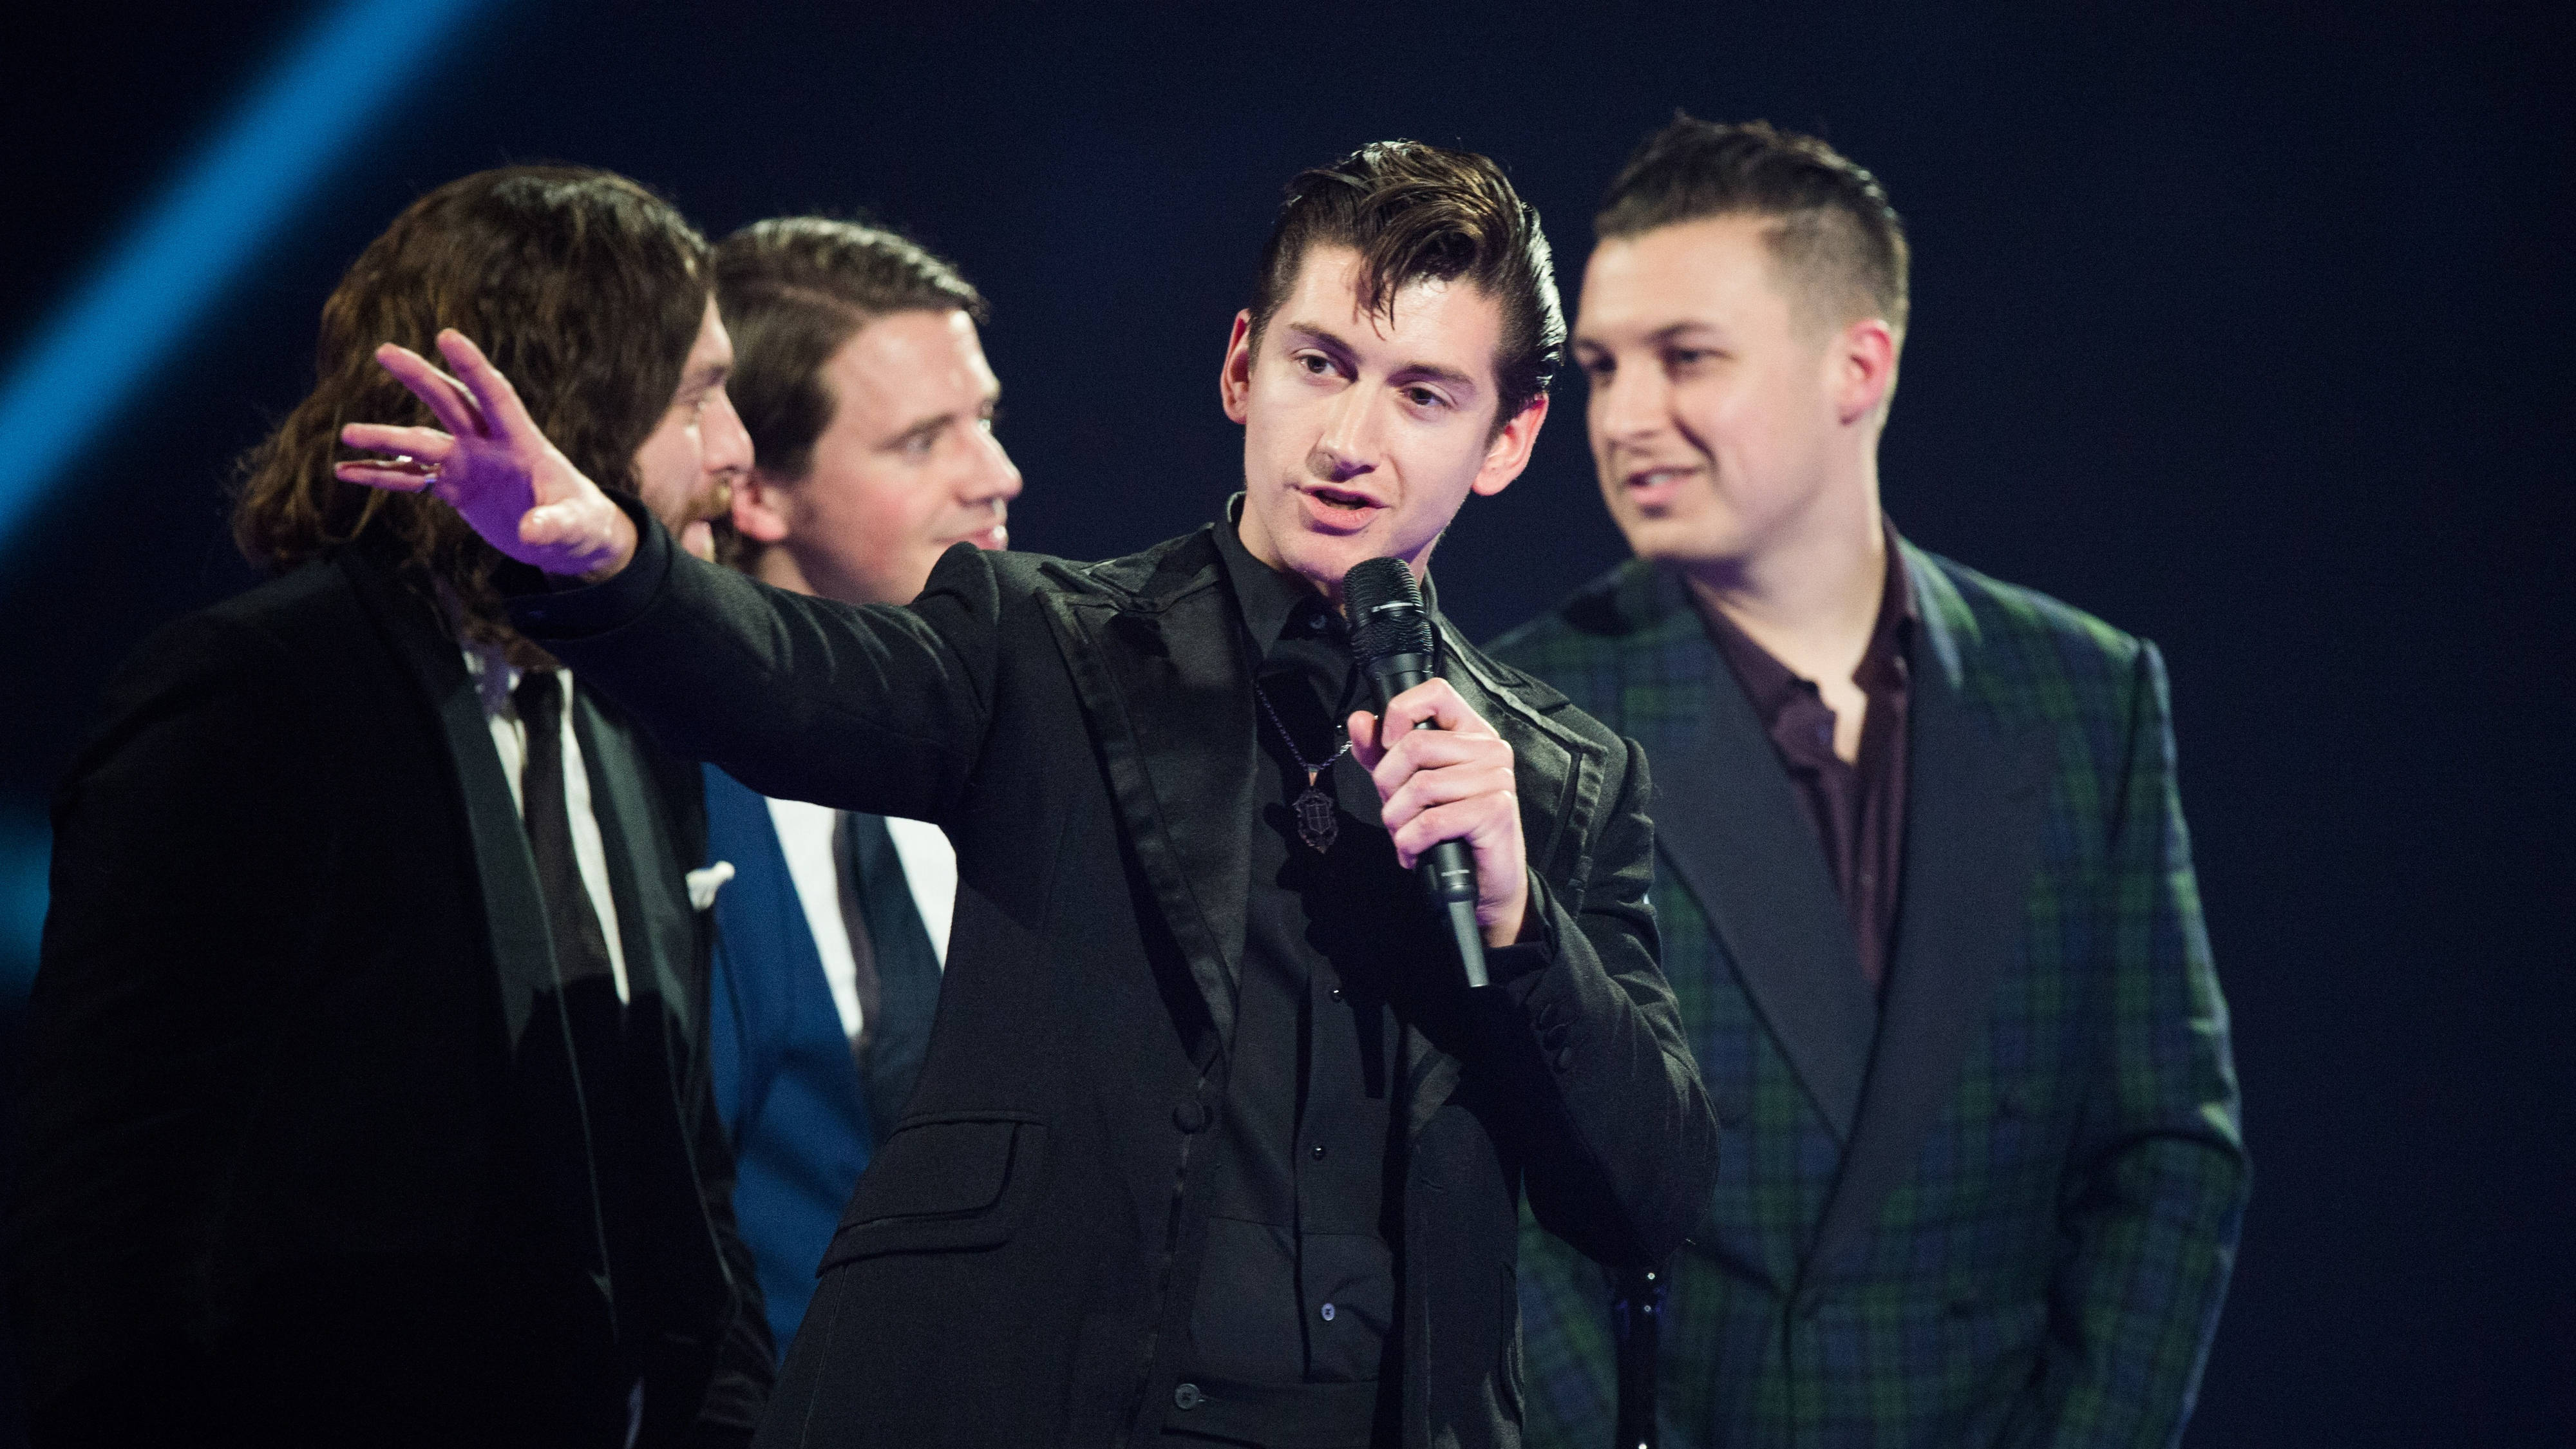 Nothing can top Alex Turner's BRIT Awards speech - X